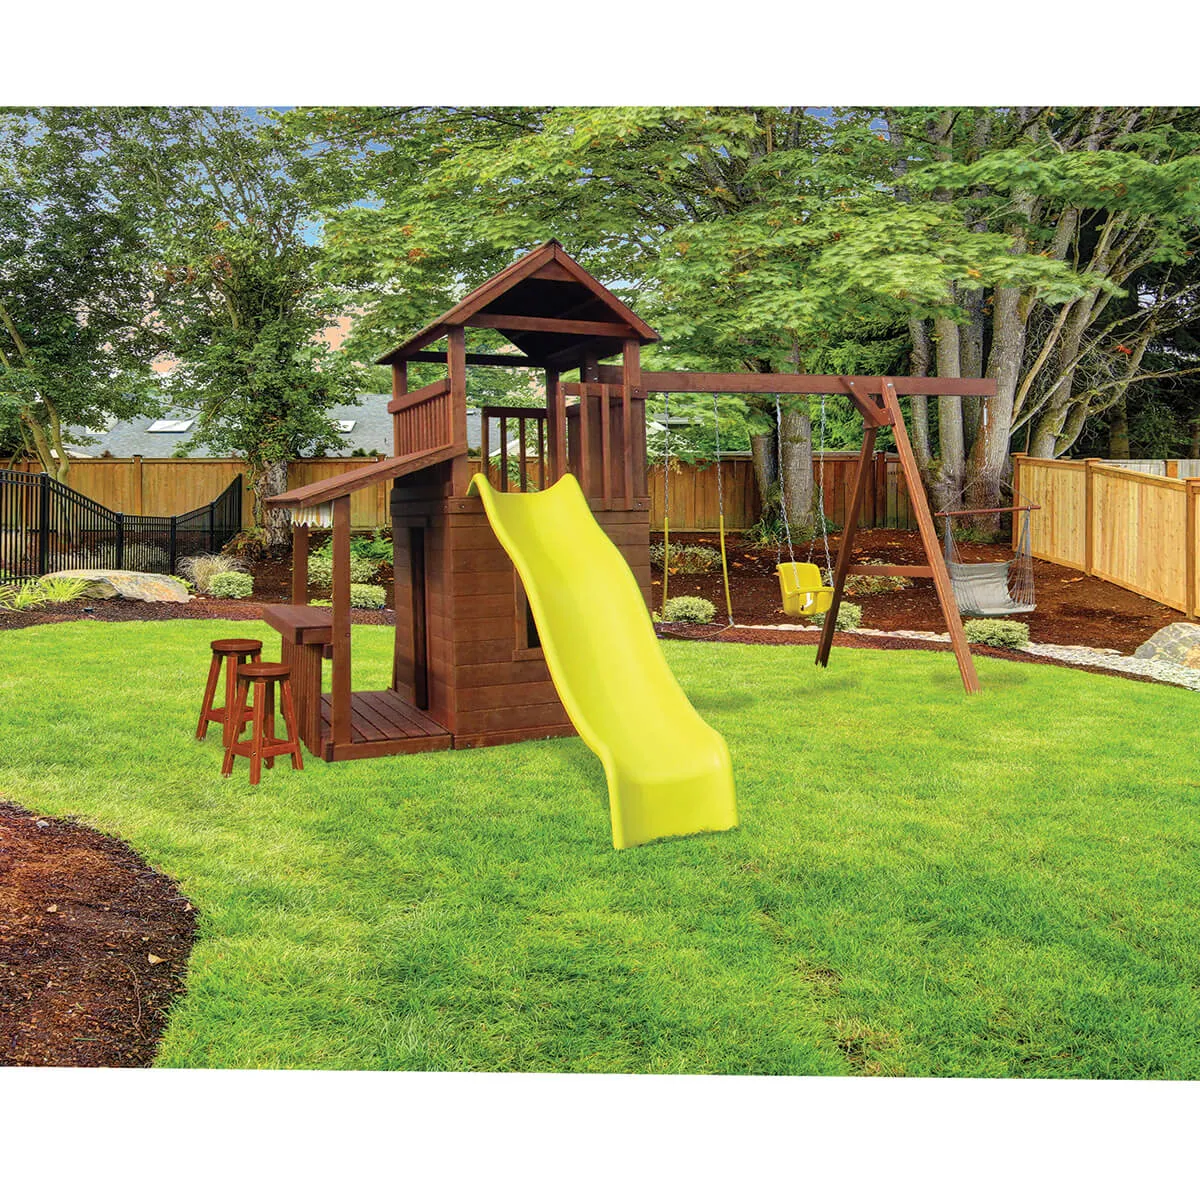 CL#517 Wooden Play Set